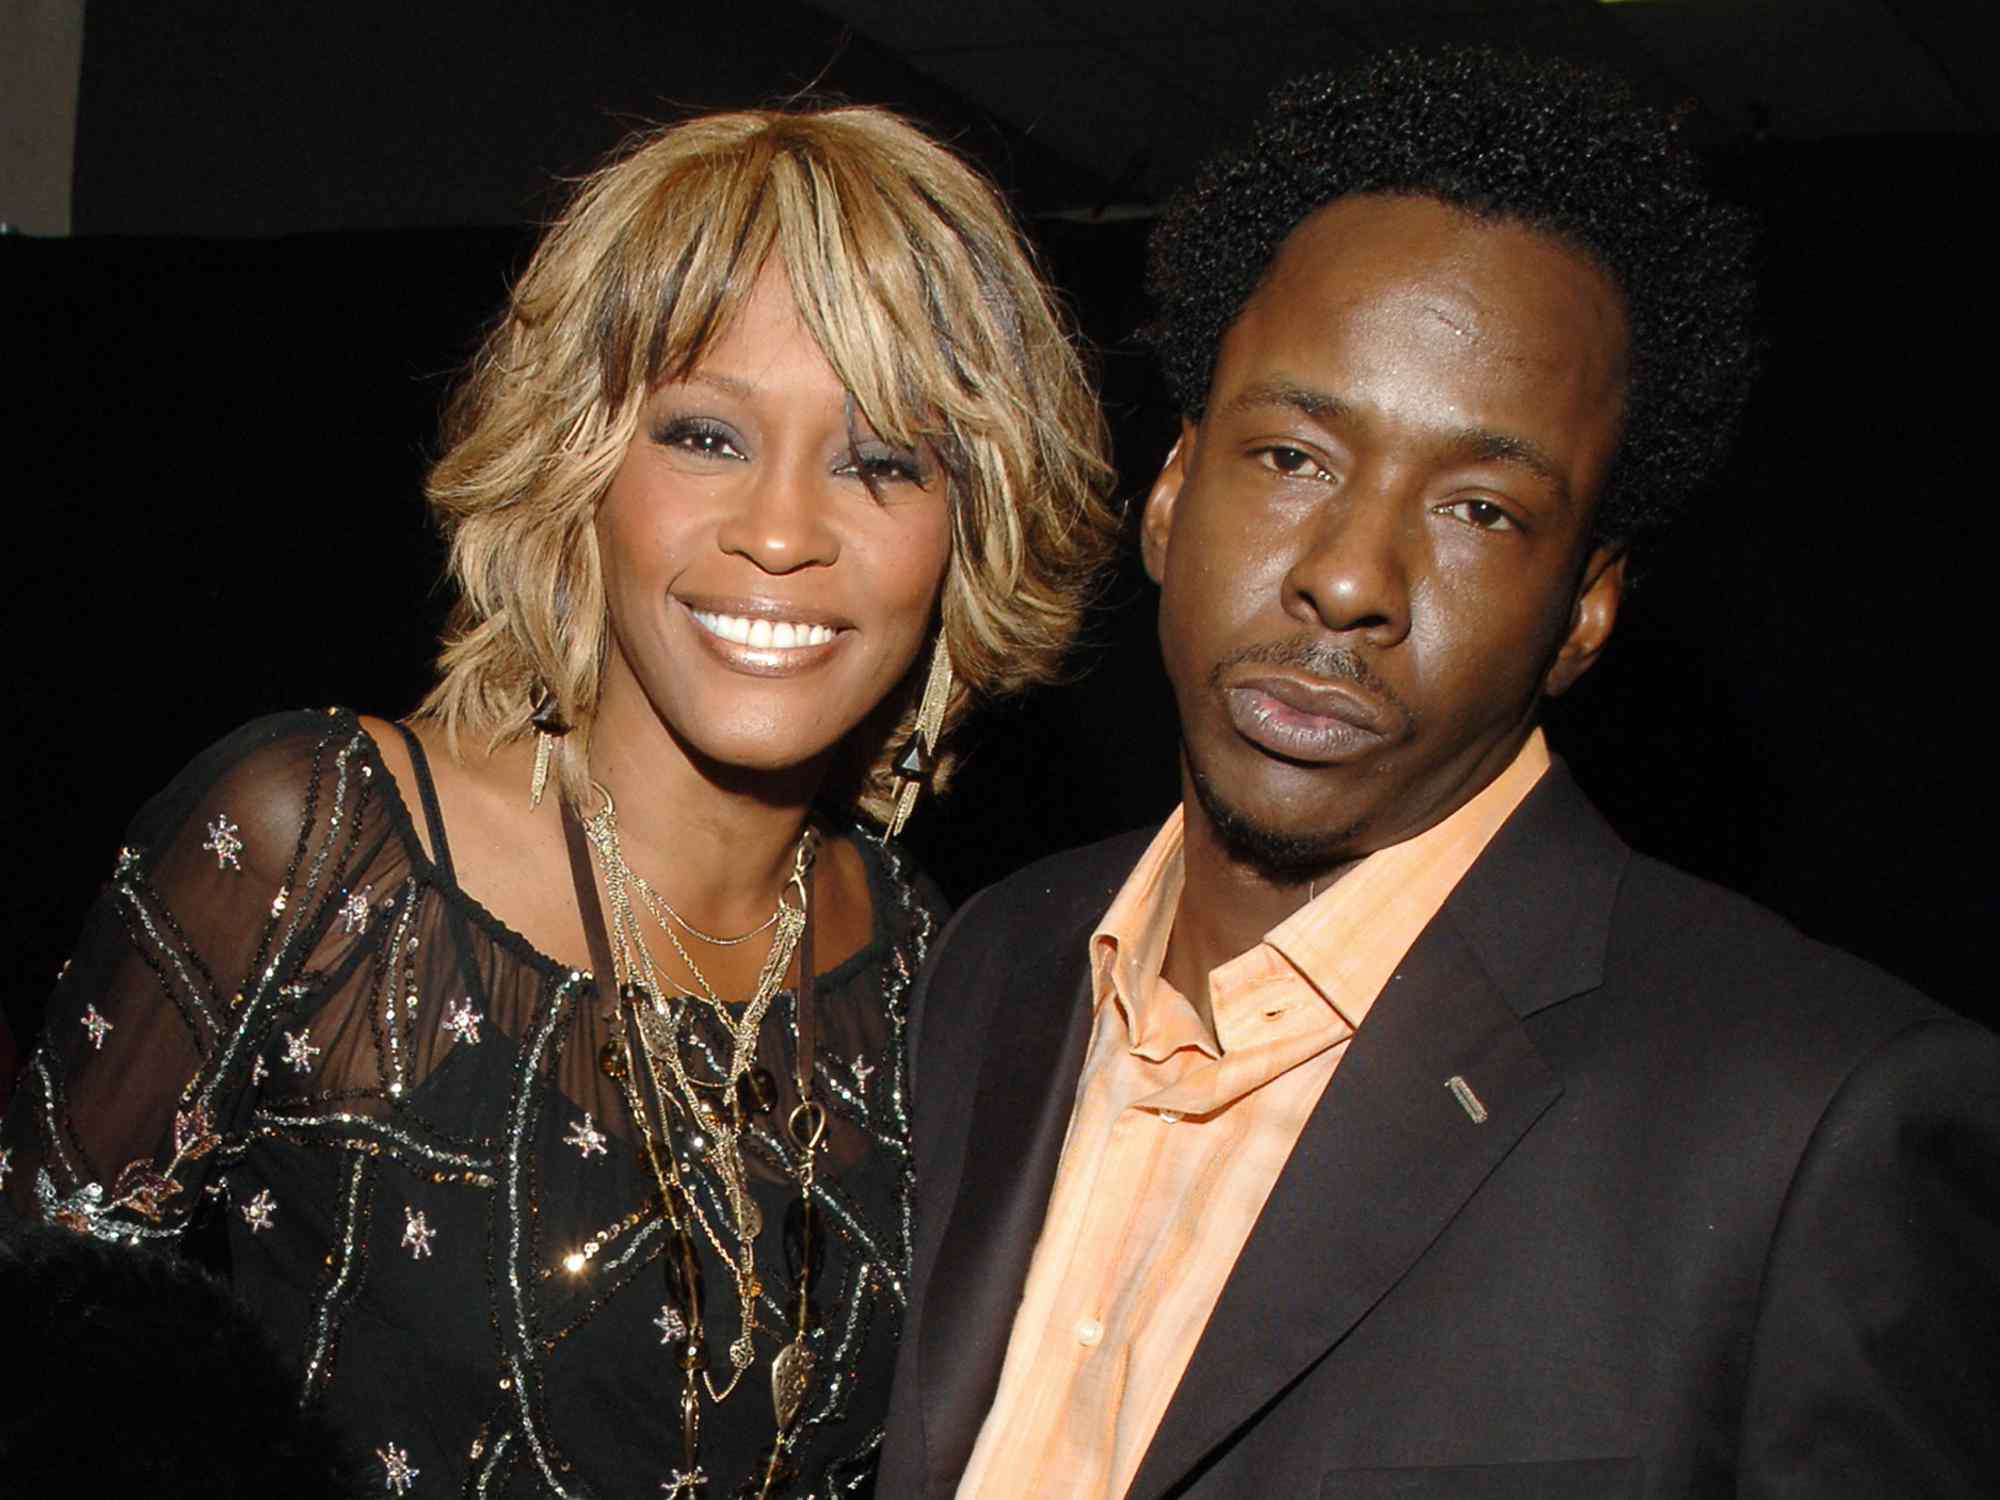 Whitney Houston and Bobby Brown at BET's 25th Anniversary